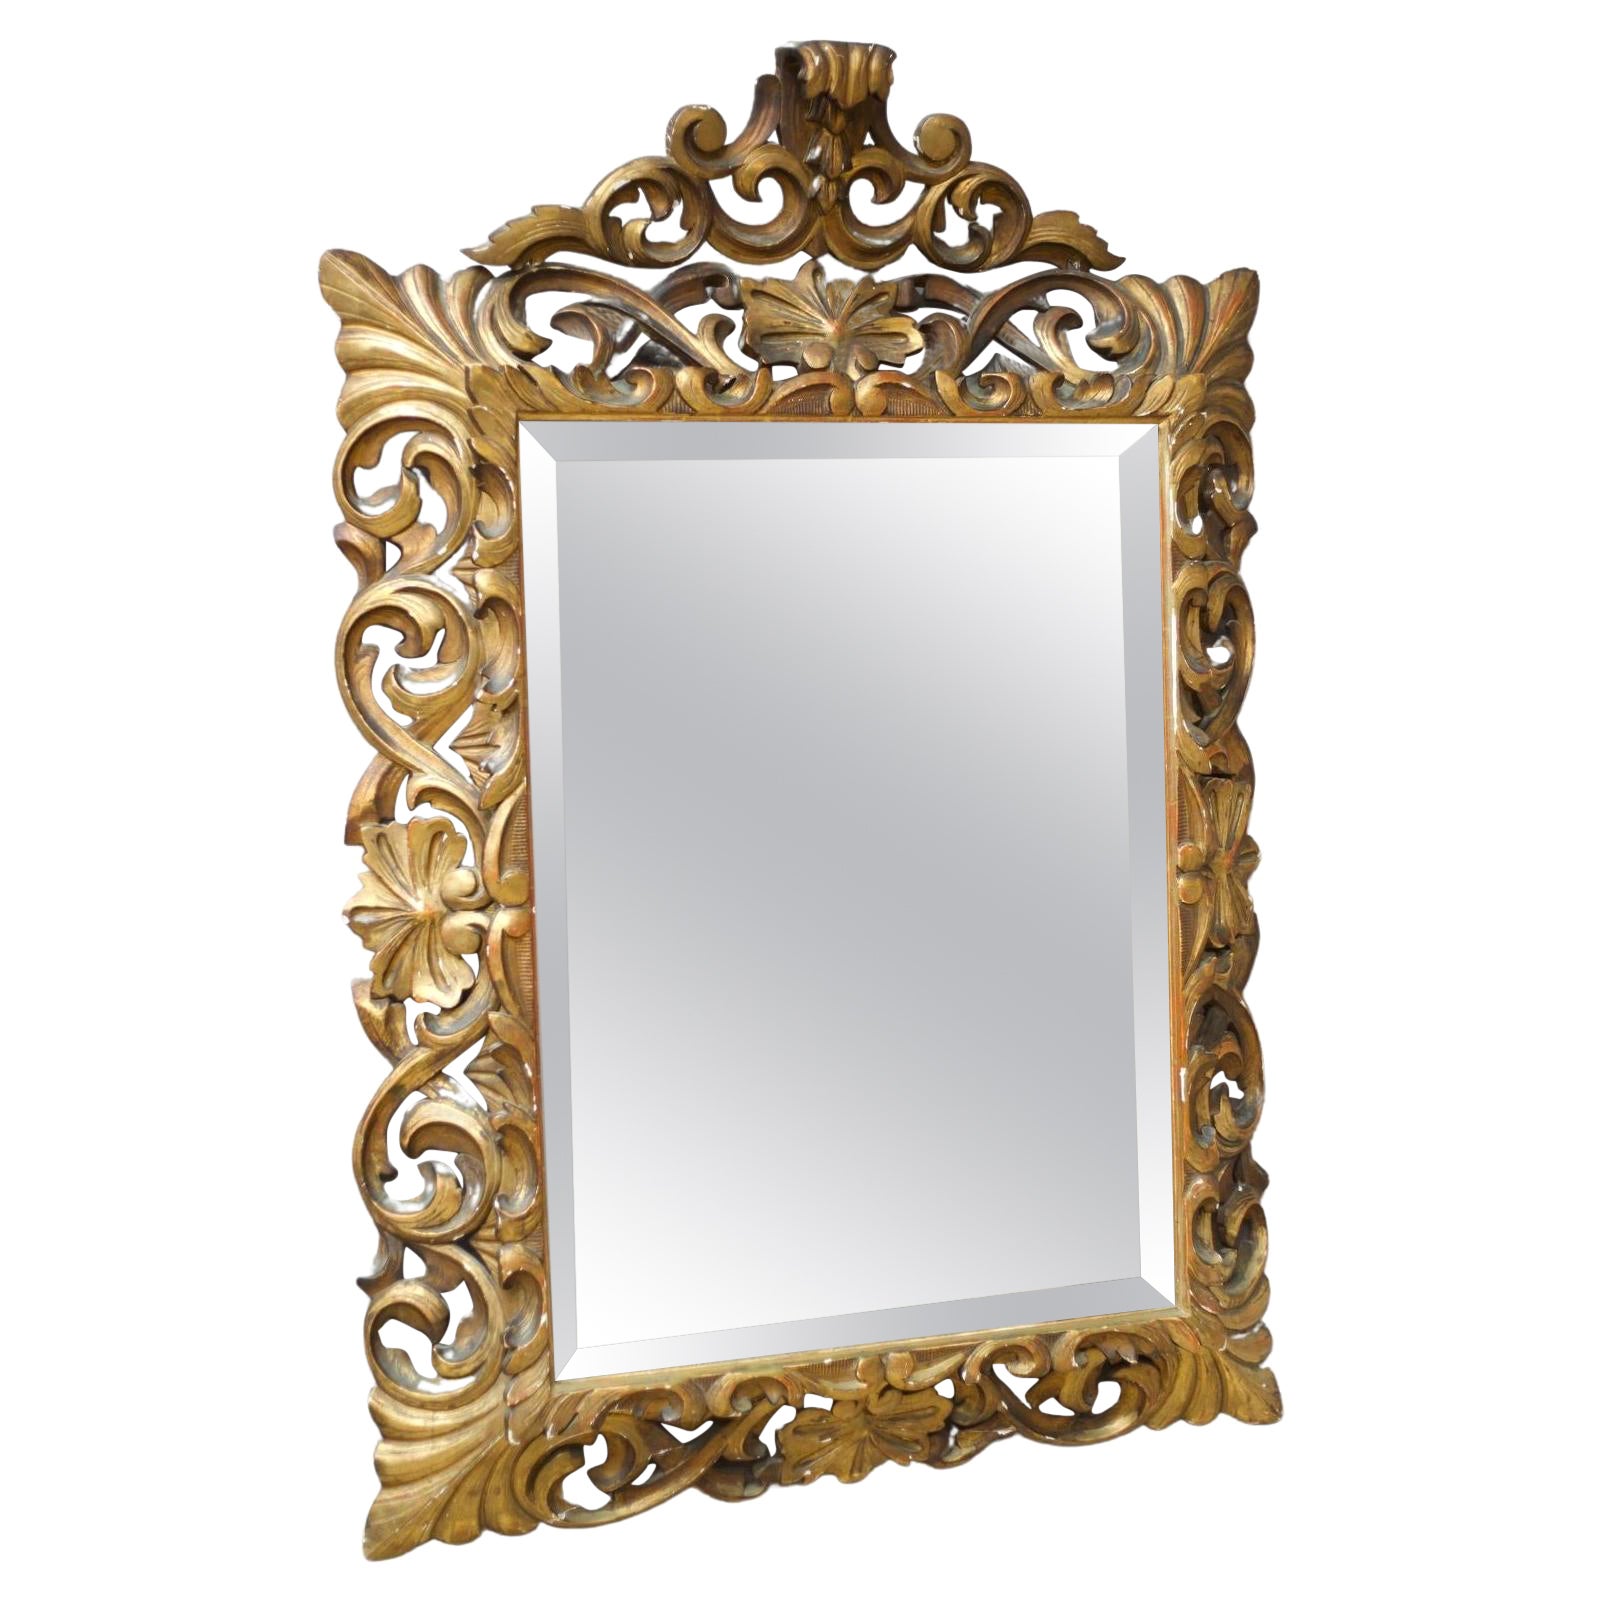 Early 19th Century Italian Giltwood Carved Mirror For Sale